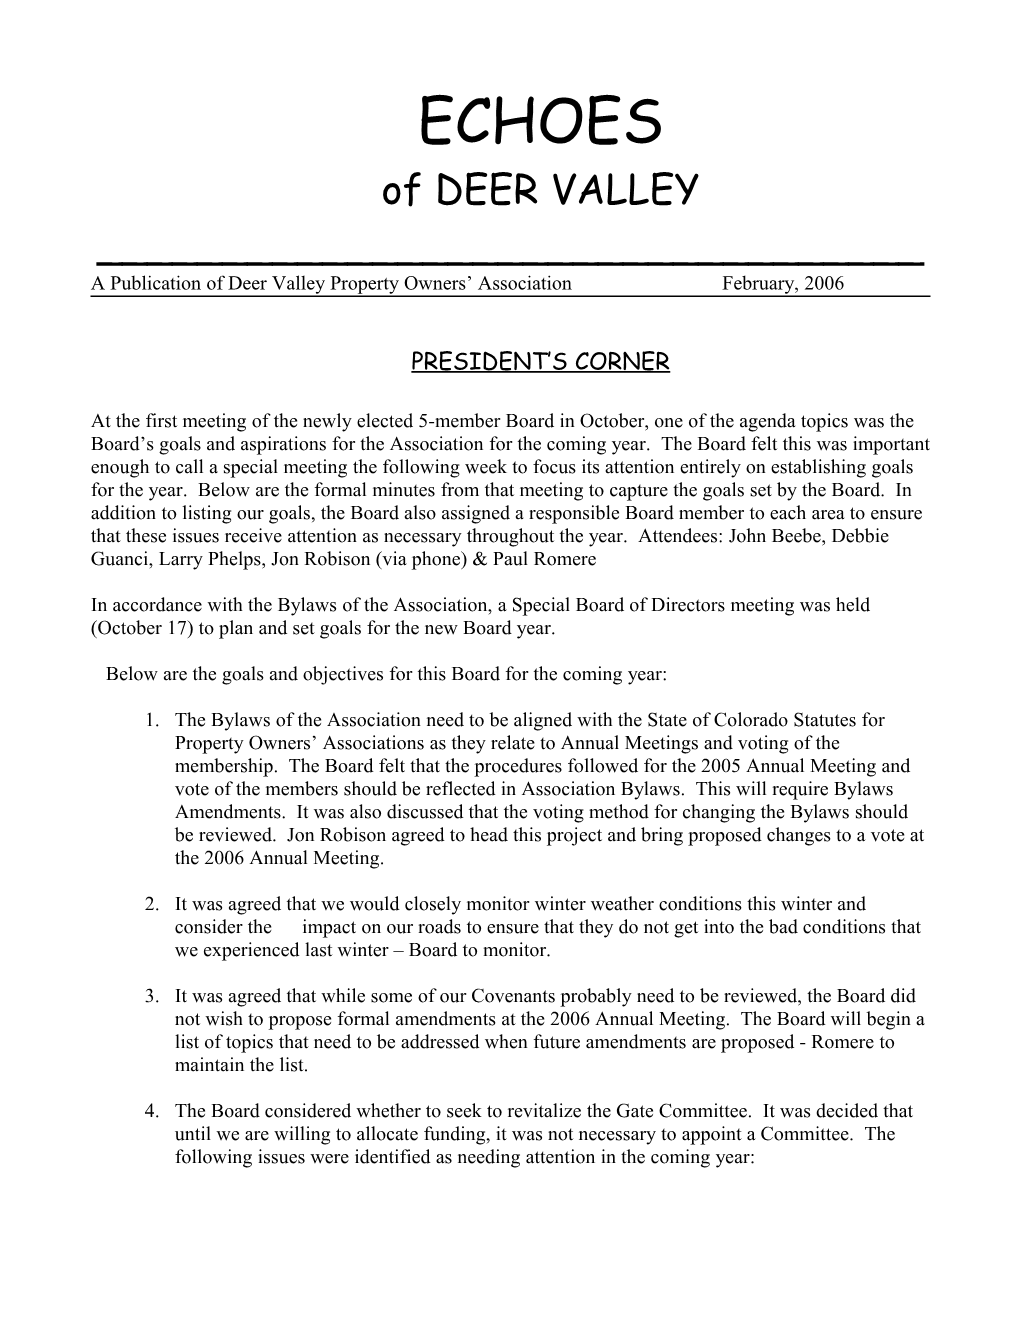 A Publication of Deervalley Property Owners Association February, 2006